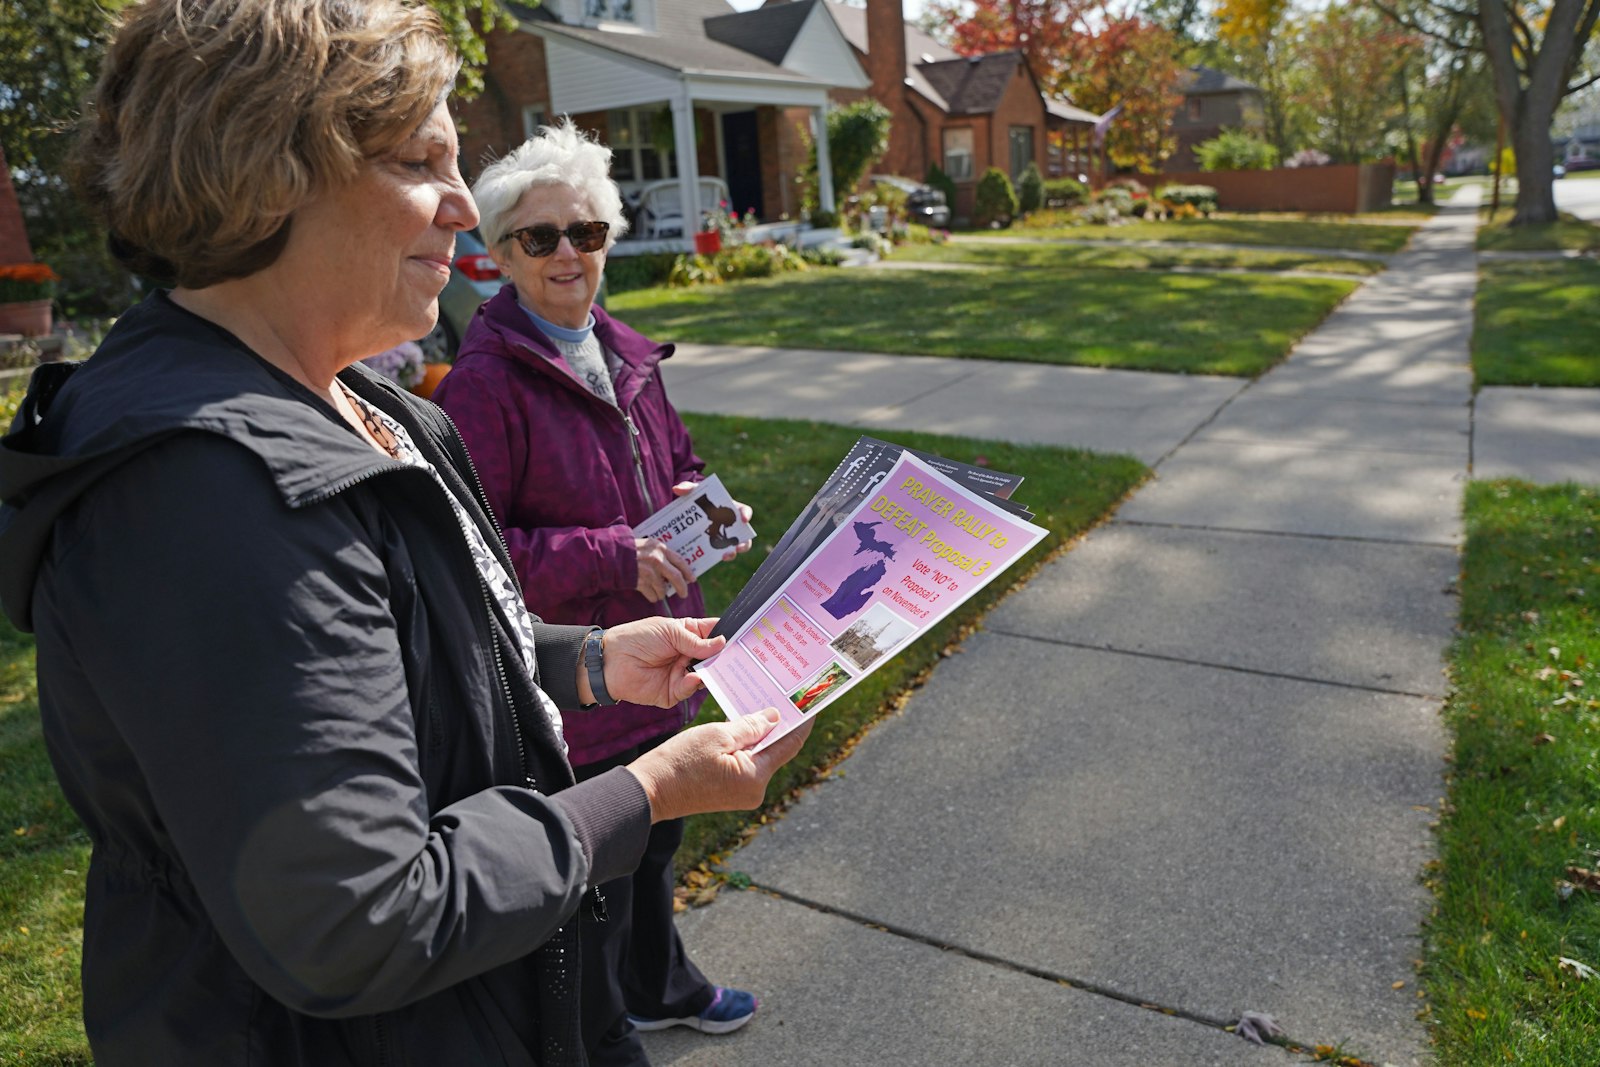 Paula Dixon, left, and Peggy Stack of the National Shrine of the Little Flower Basilica in Royal Oak, canvass a neighborhood in opposition to Proposal 3 on Oct. 14. Canvassers are encouraged to visit supportmiwomenandchildren.org to sign up to canvass, give to the "No on Proposal 3" campaign and order yard signs. (Dan Meloy | Detroit Catholic)